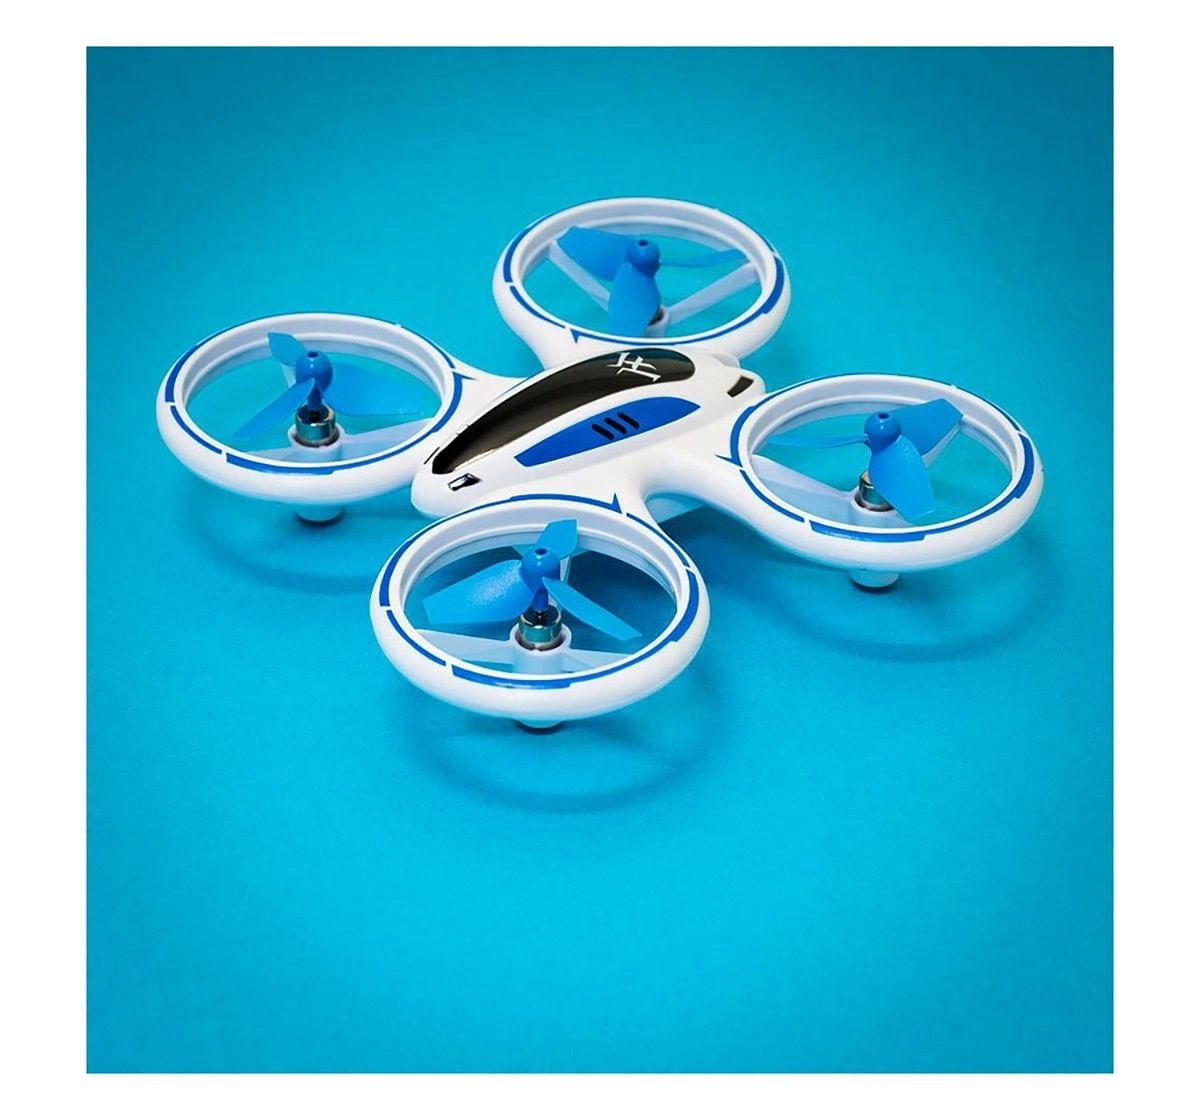 Sirius Toys Motion Control Glow Drone Remote Control Toys for Kids age 8Y+ 